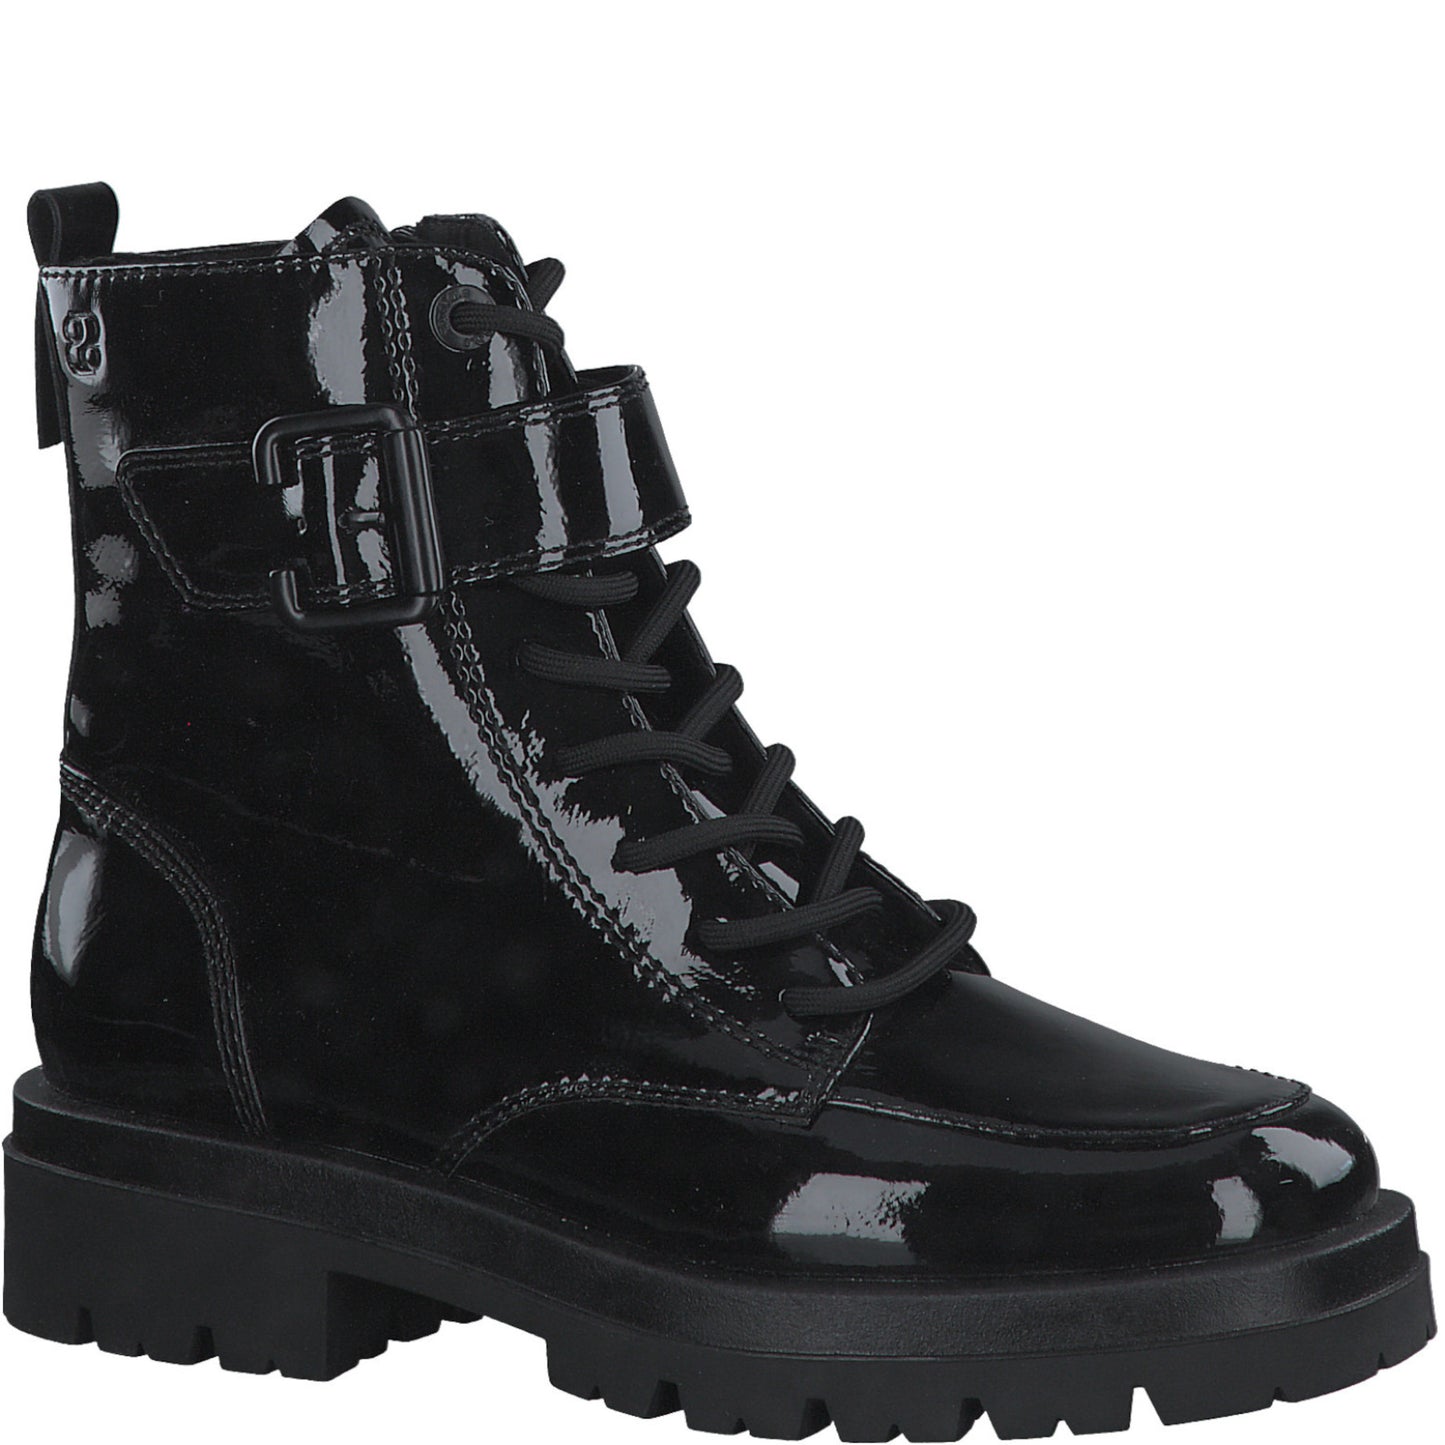 S Oliver 5-5-25251-29 018 Black Patent Boots